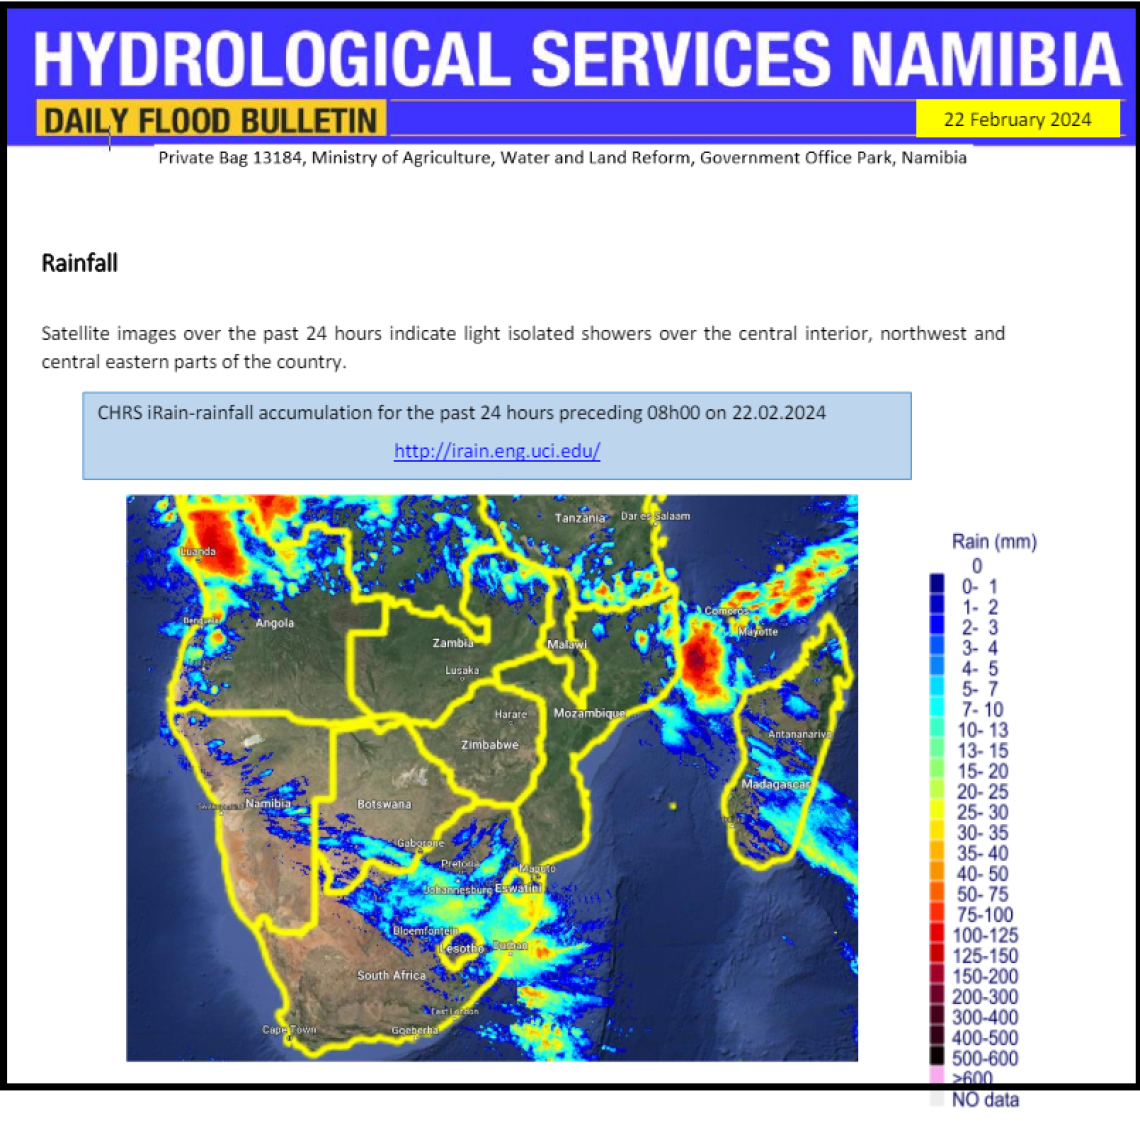 Front page of February 22, 2024 issue of Hydrologic Services Namibia